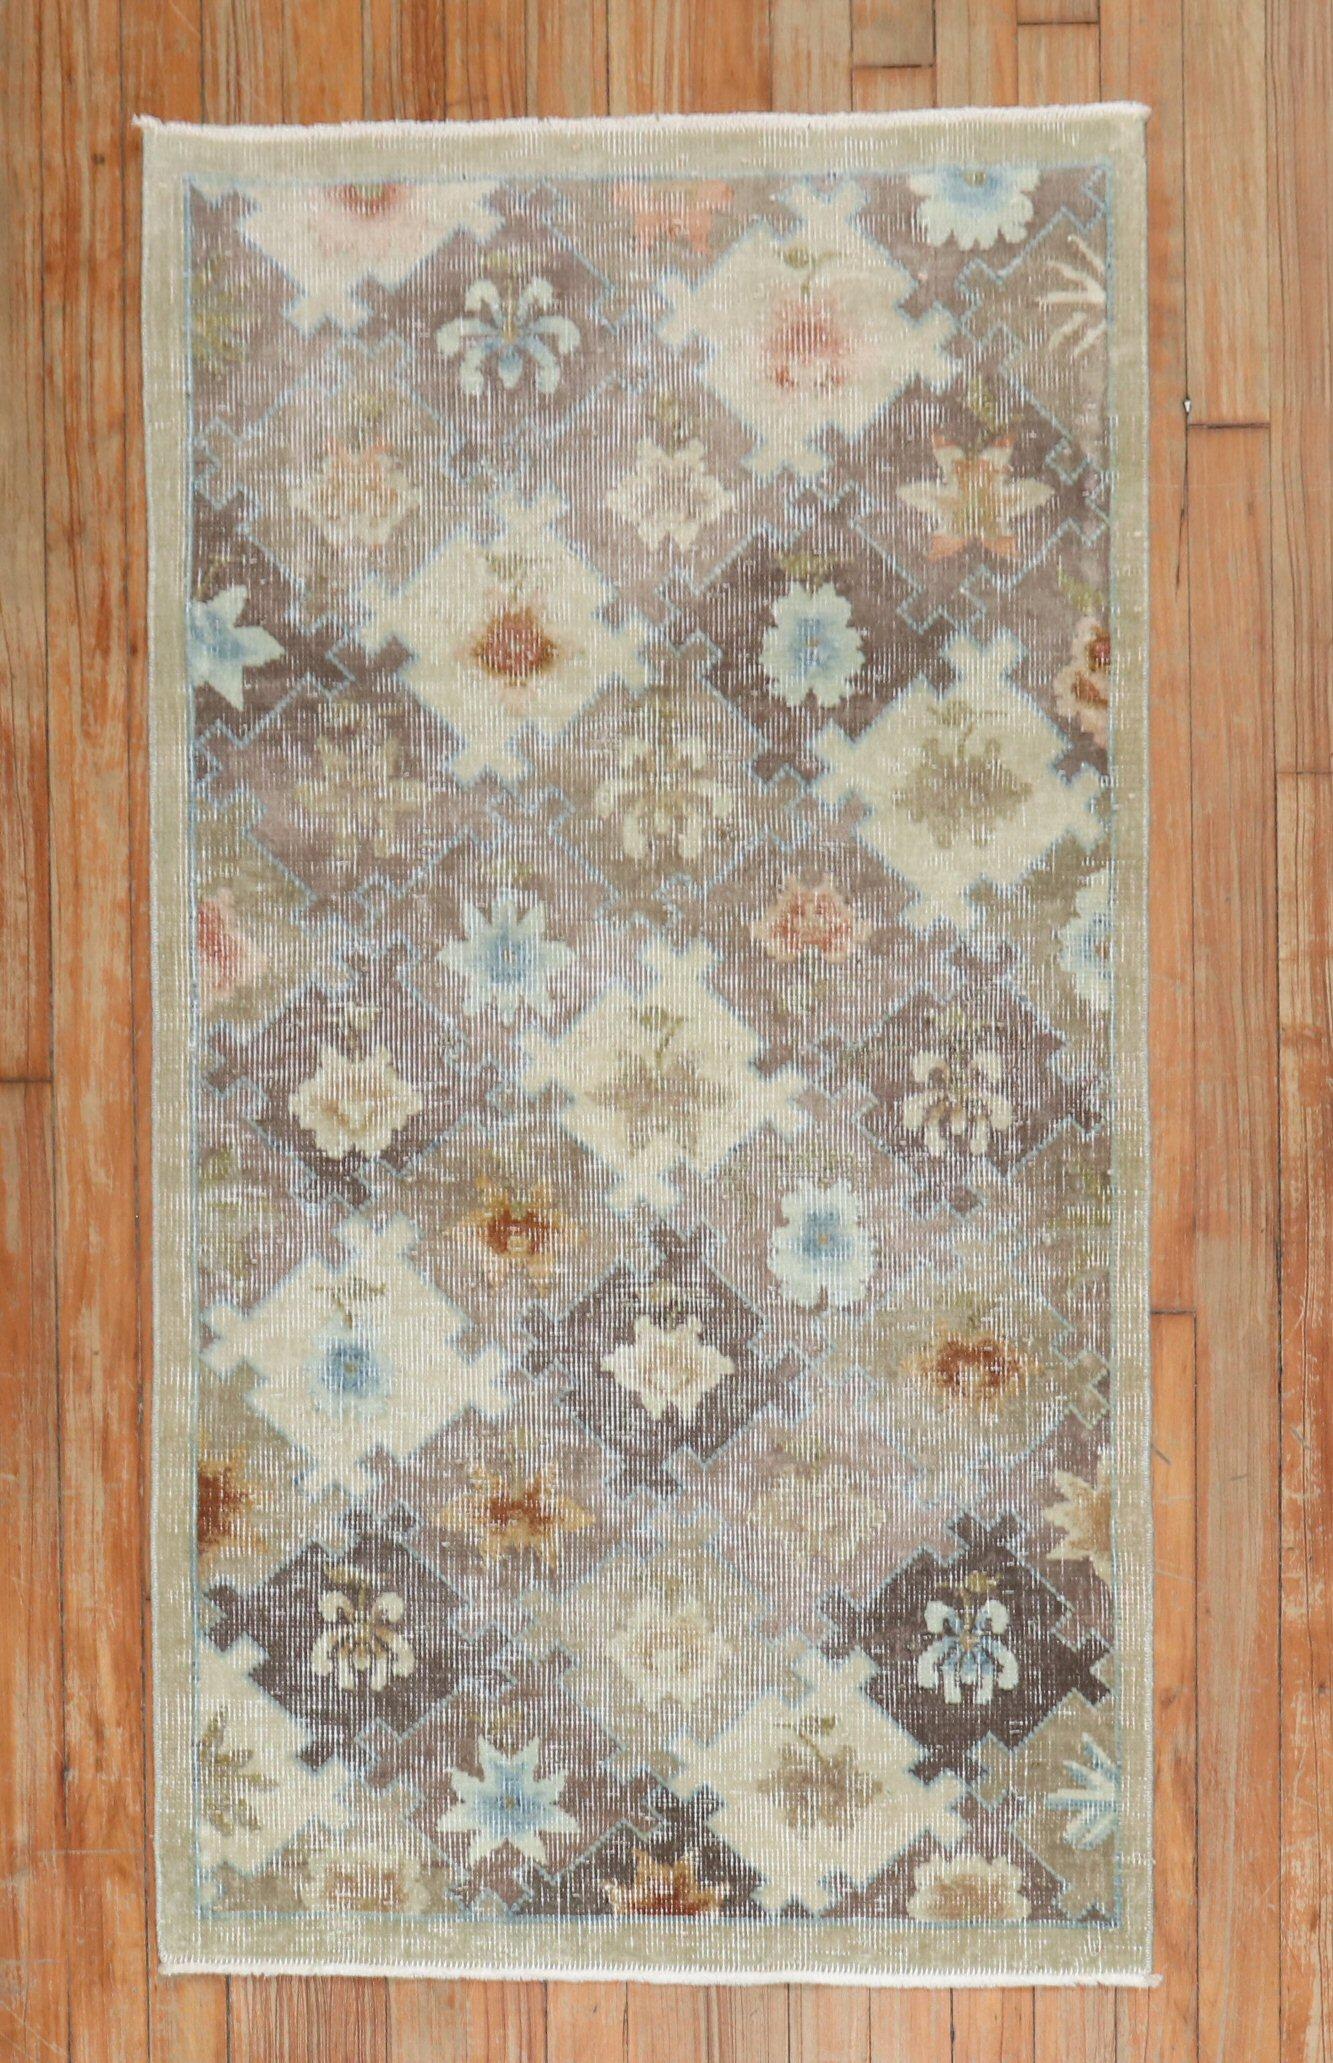 Geometric worn early 20th century Chinese rug

Measures: 2'4